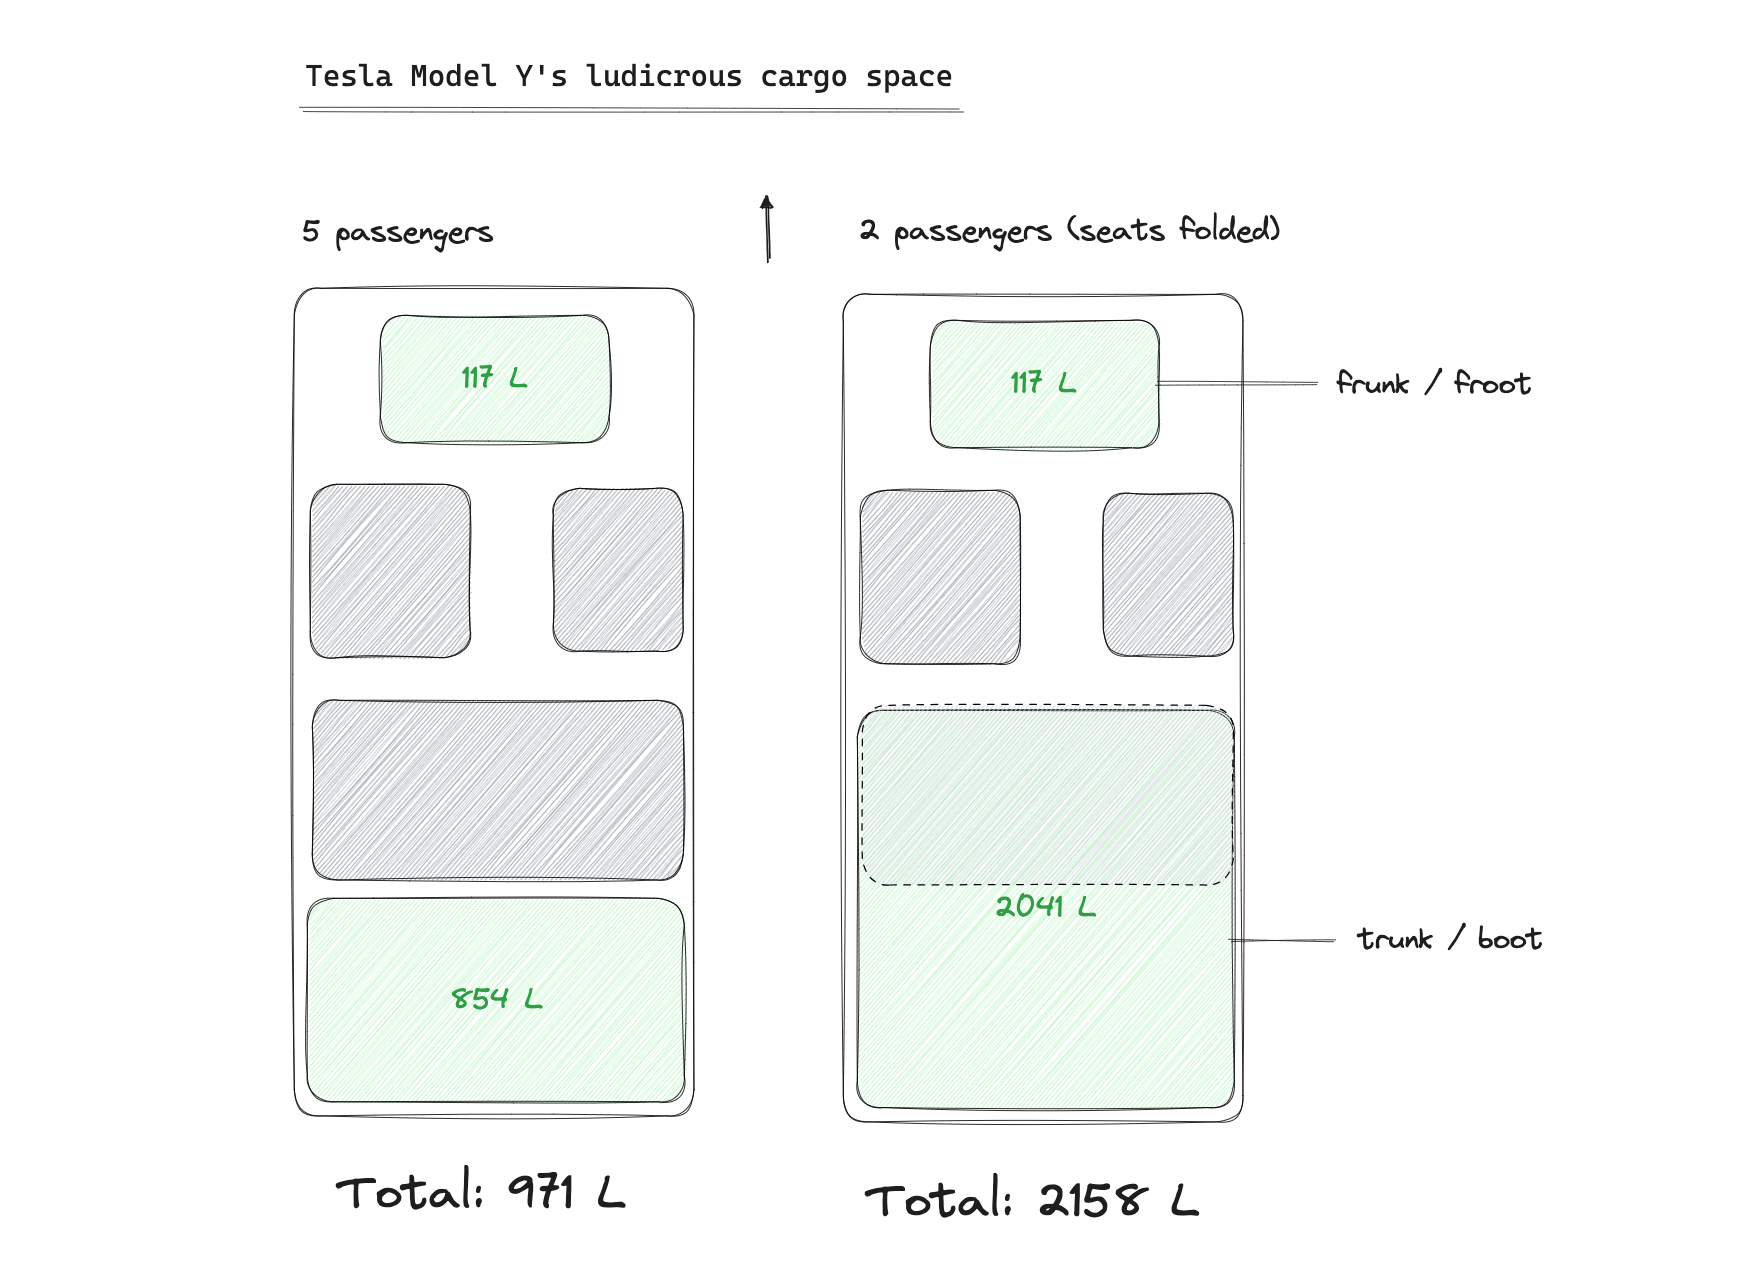 drawing from a top-view of the Tesla Model Y annotating the amount of cargo space in the frunk and trunk